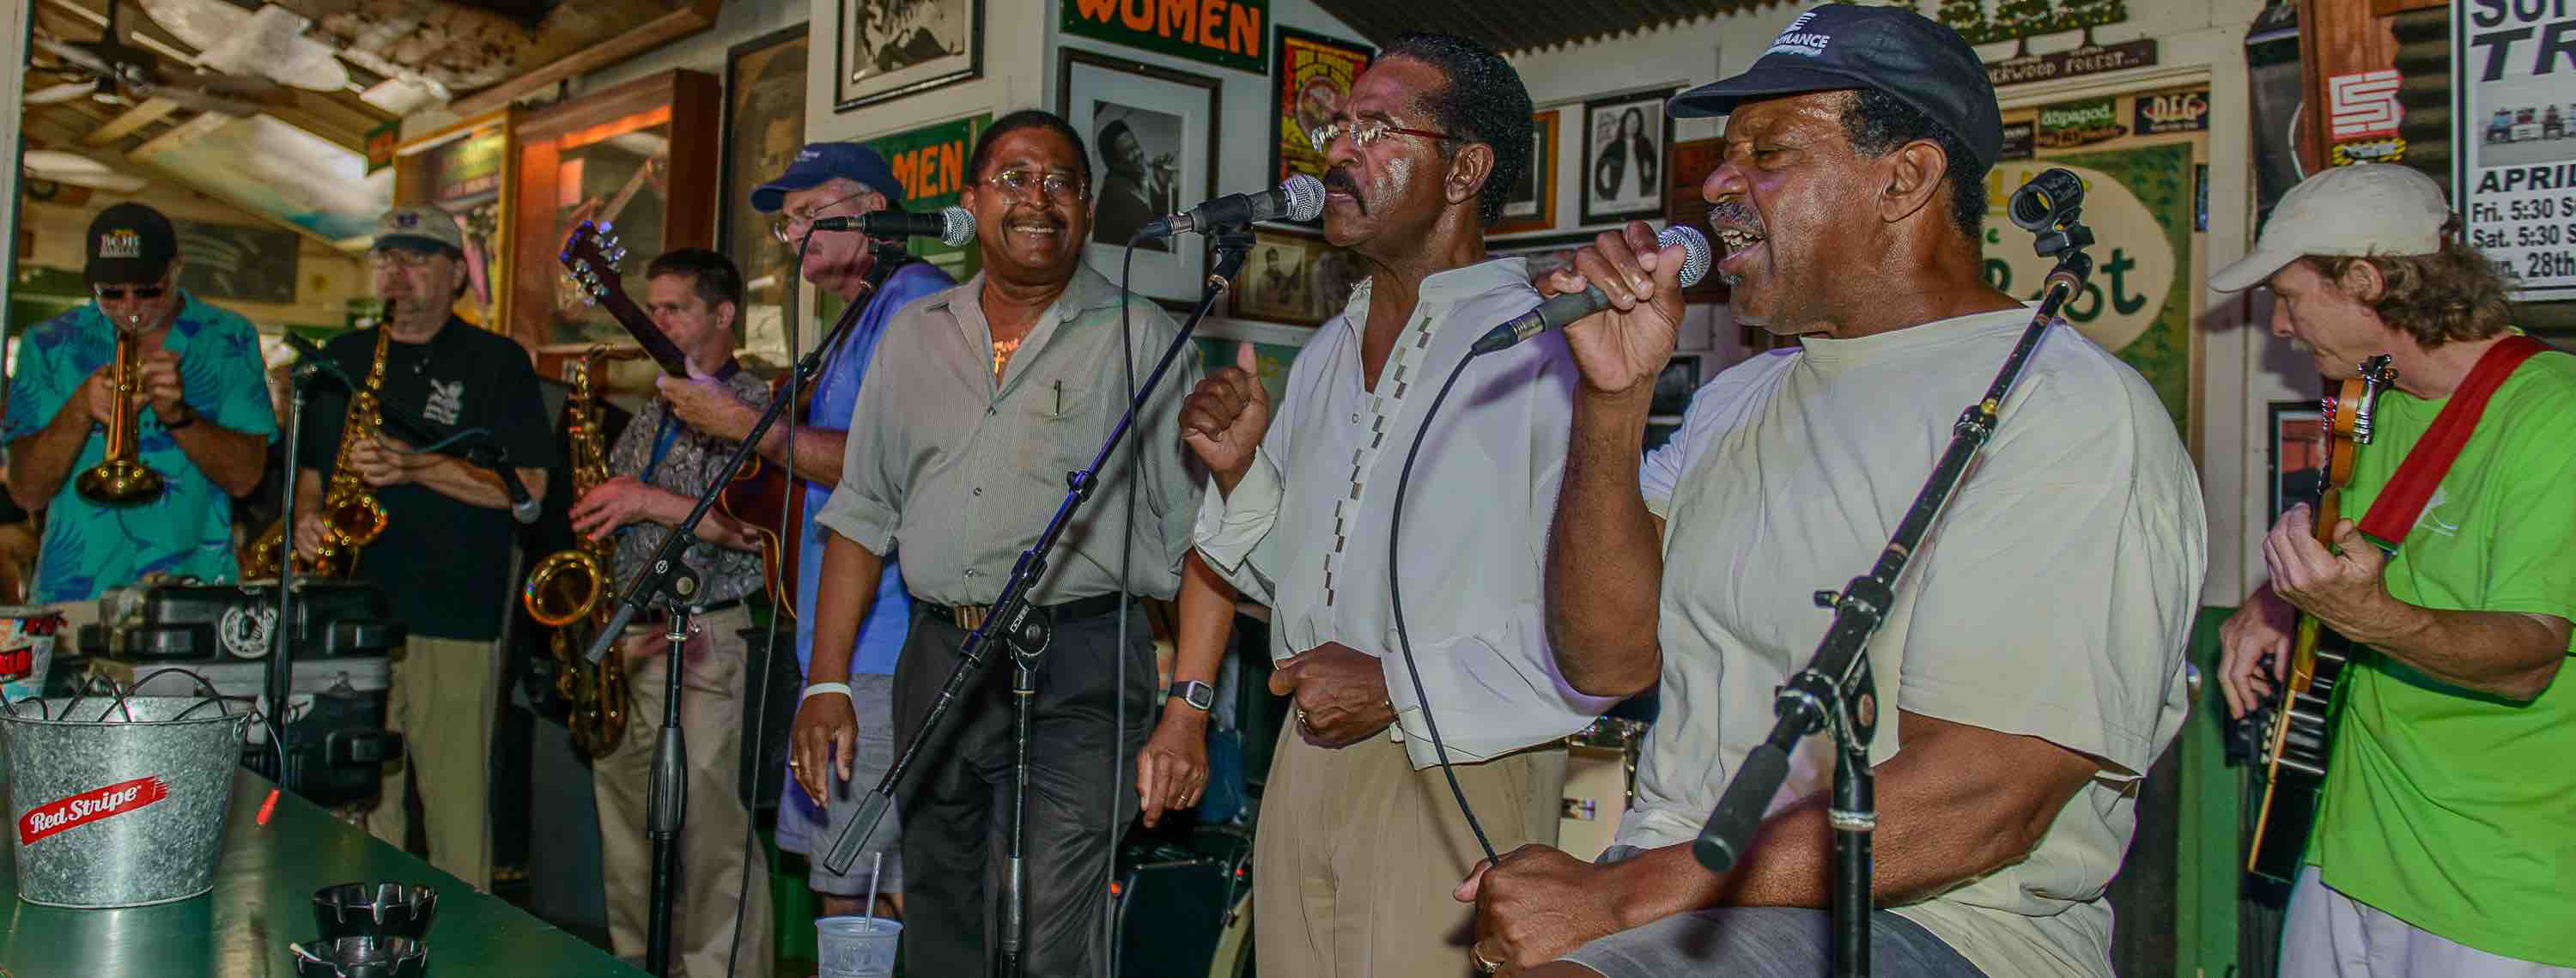 Photographer Ralph DePalma is as much a part of Key West’s music scene as the musicians he’s documenting. From the rhythm guys who keep the beat steady to local celebs like Barry Cuda and Bill Blue, Ralph pays homage to a generation of musicians at the heart of the island’s soul.